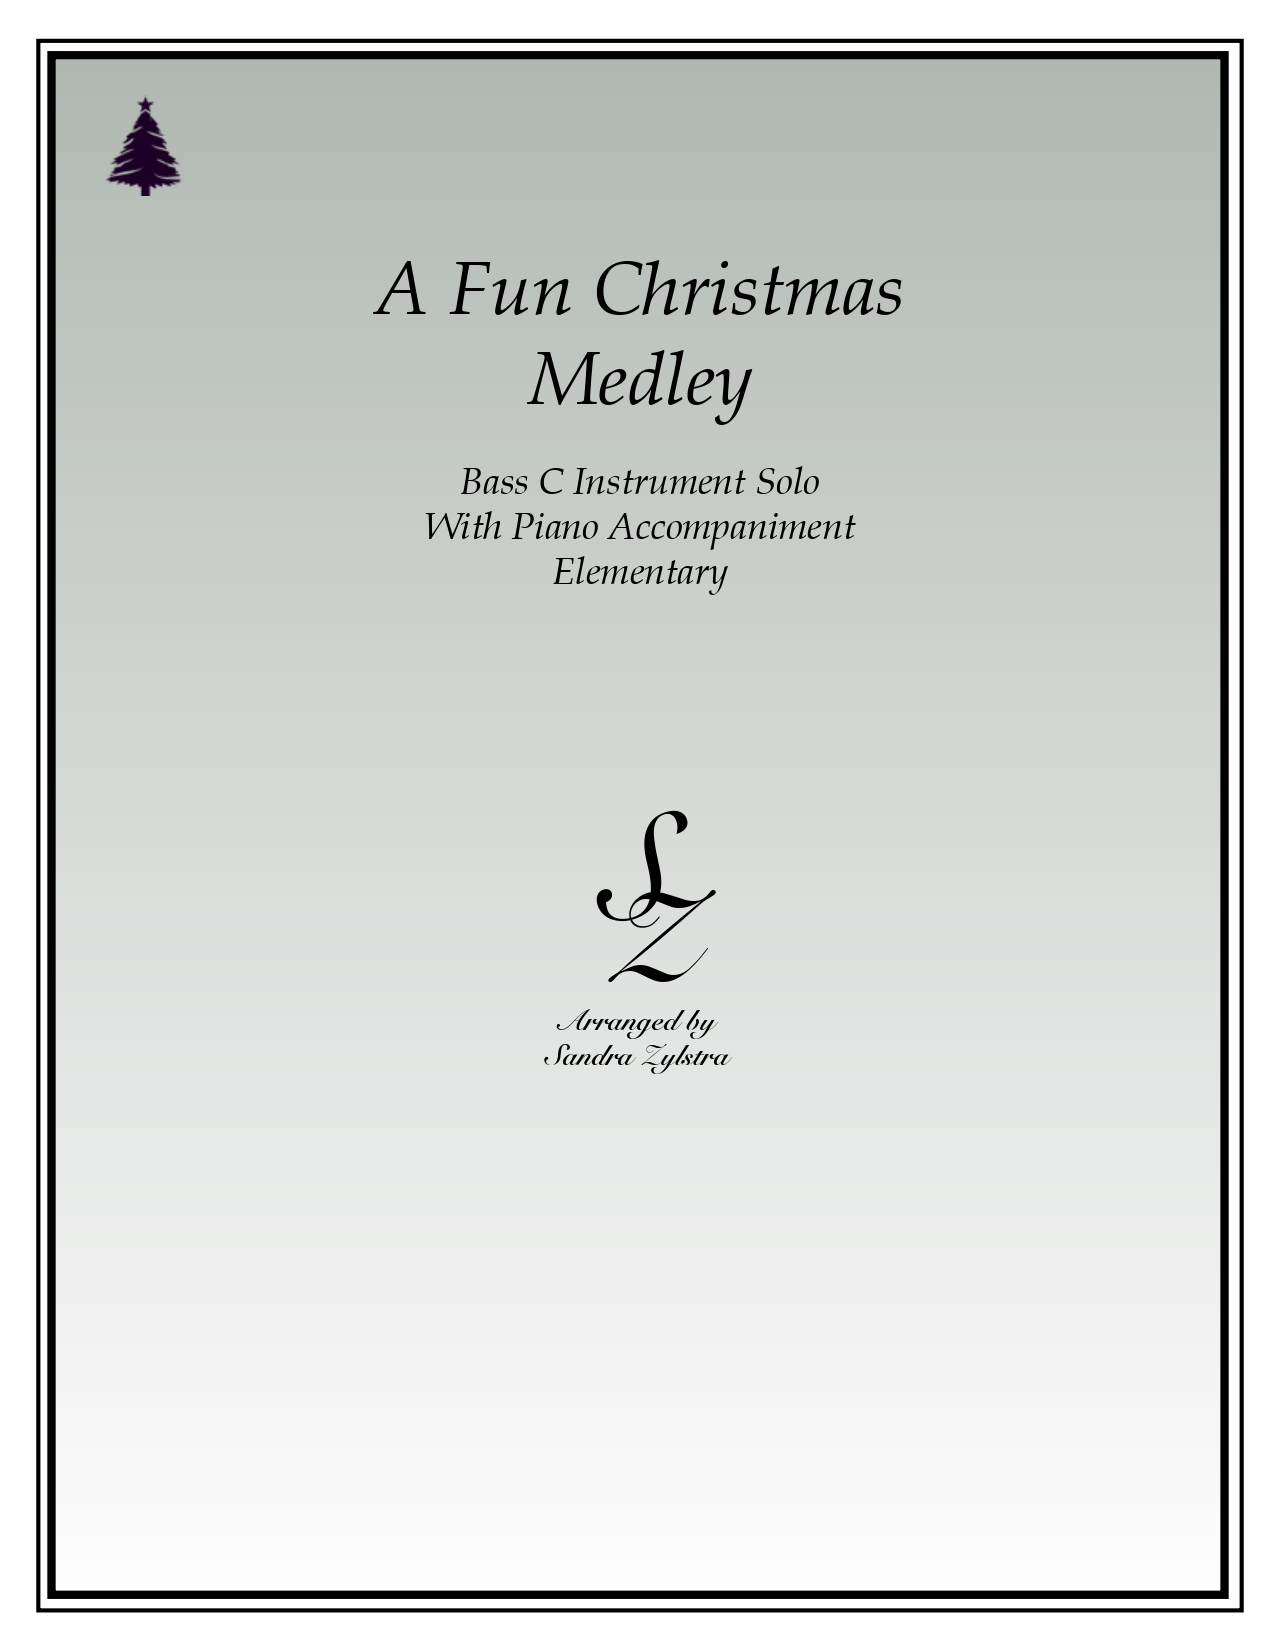 A Fun Christmas Medley bass C instrument solo parts cover page 00011